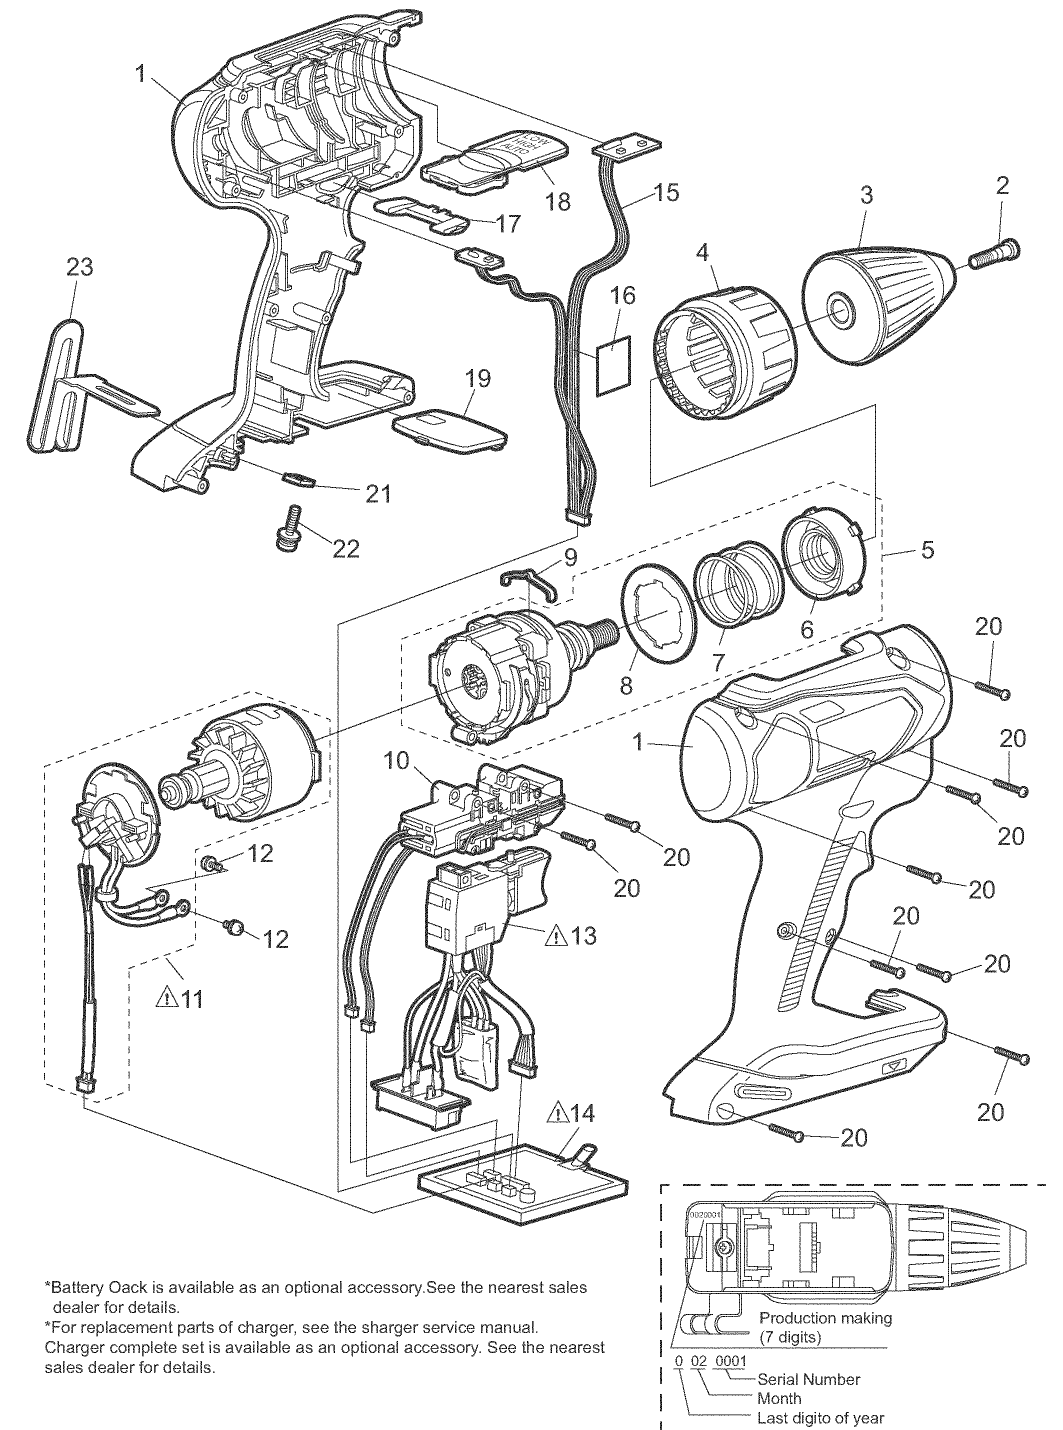 EY7443: Exploded View